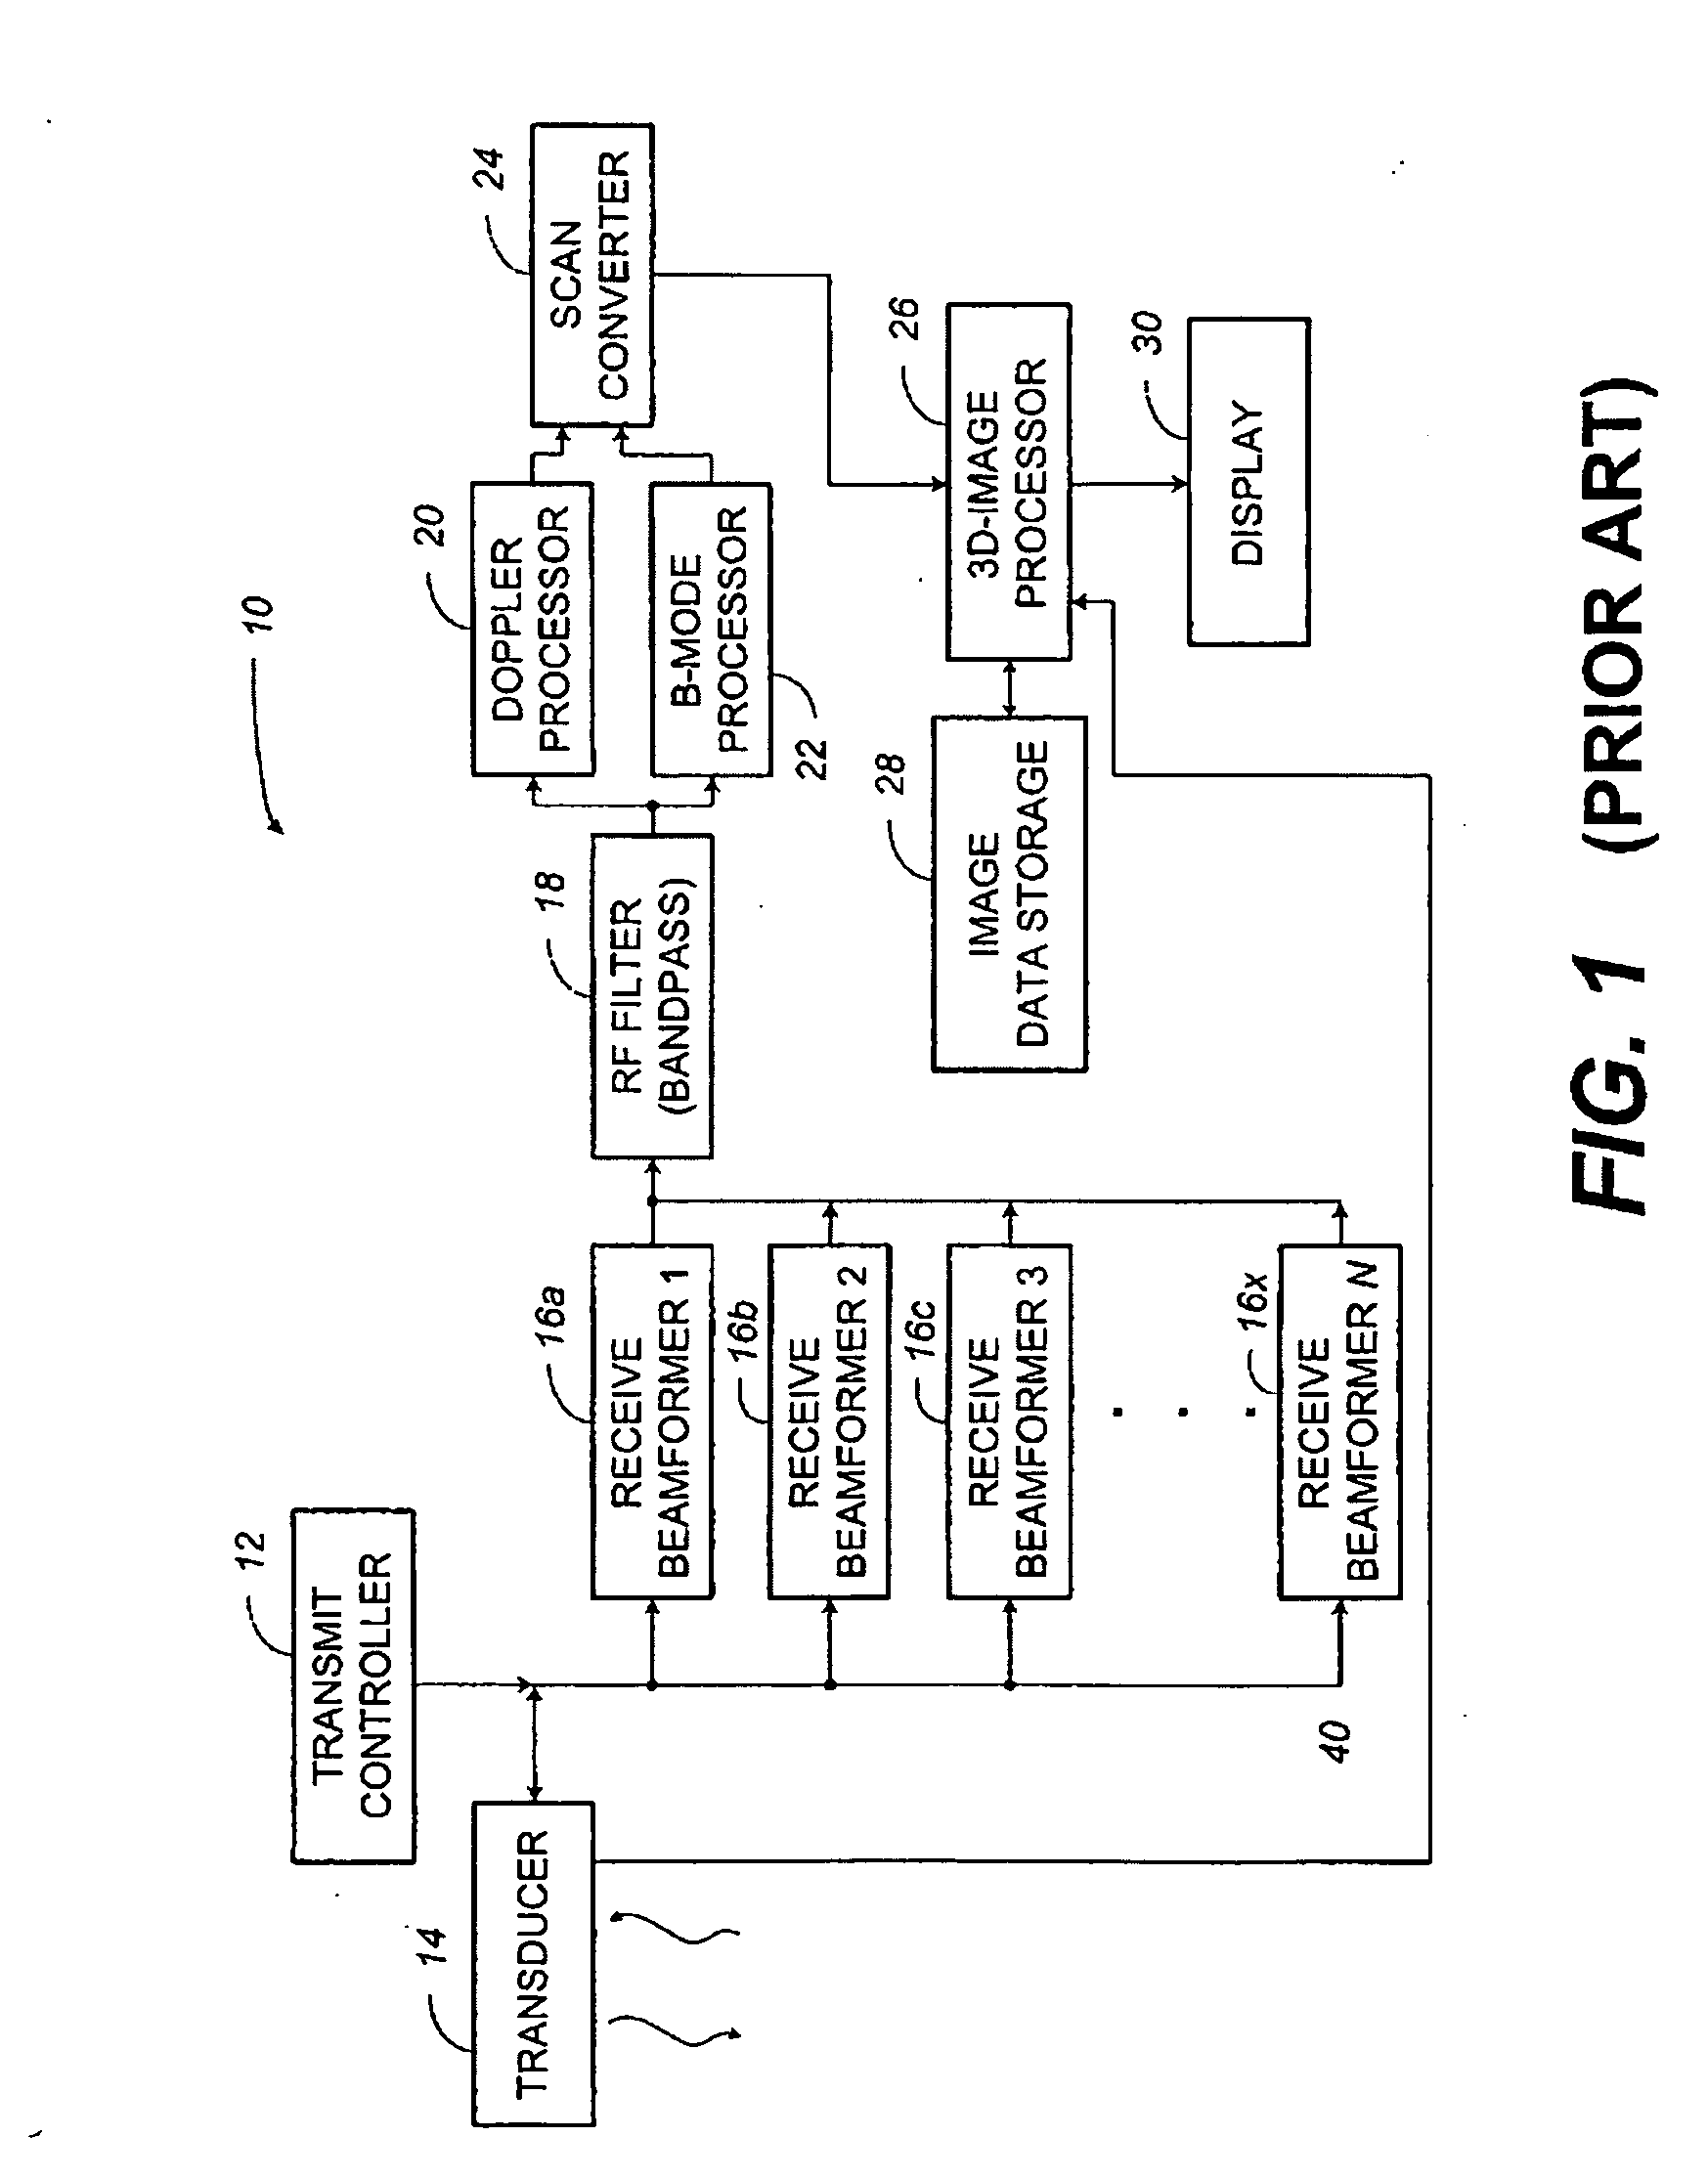 Ultrasound-imaging systems and methods for a user-guided three-dimensional volume-scan sequence